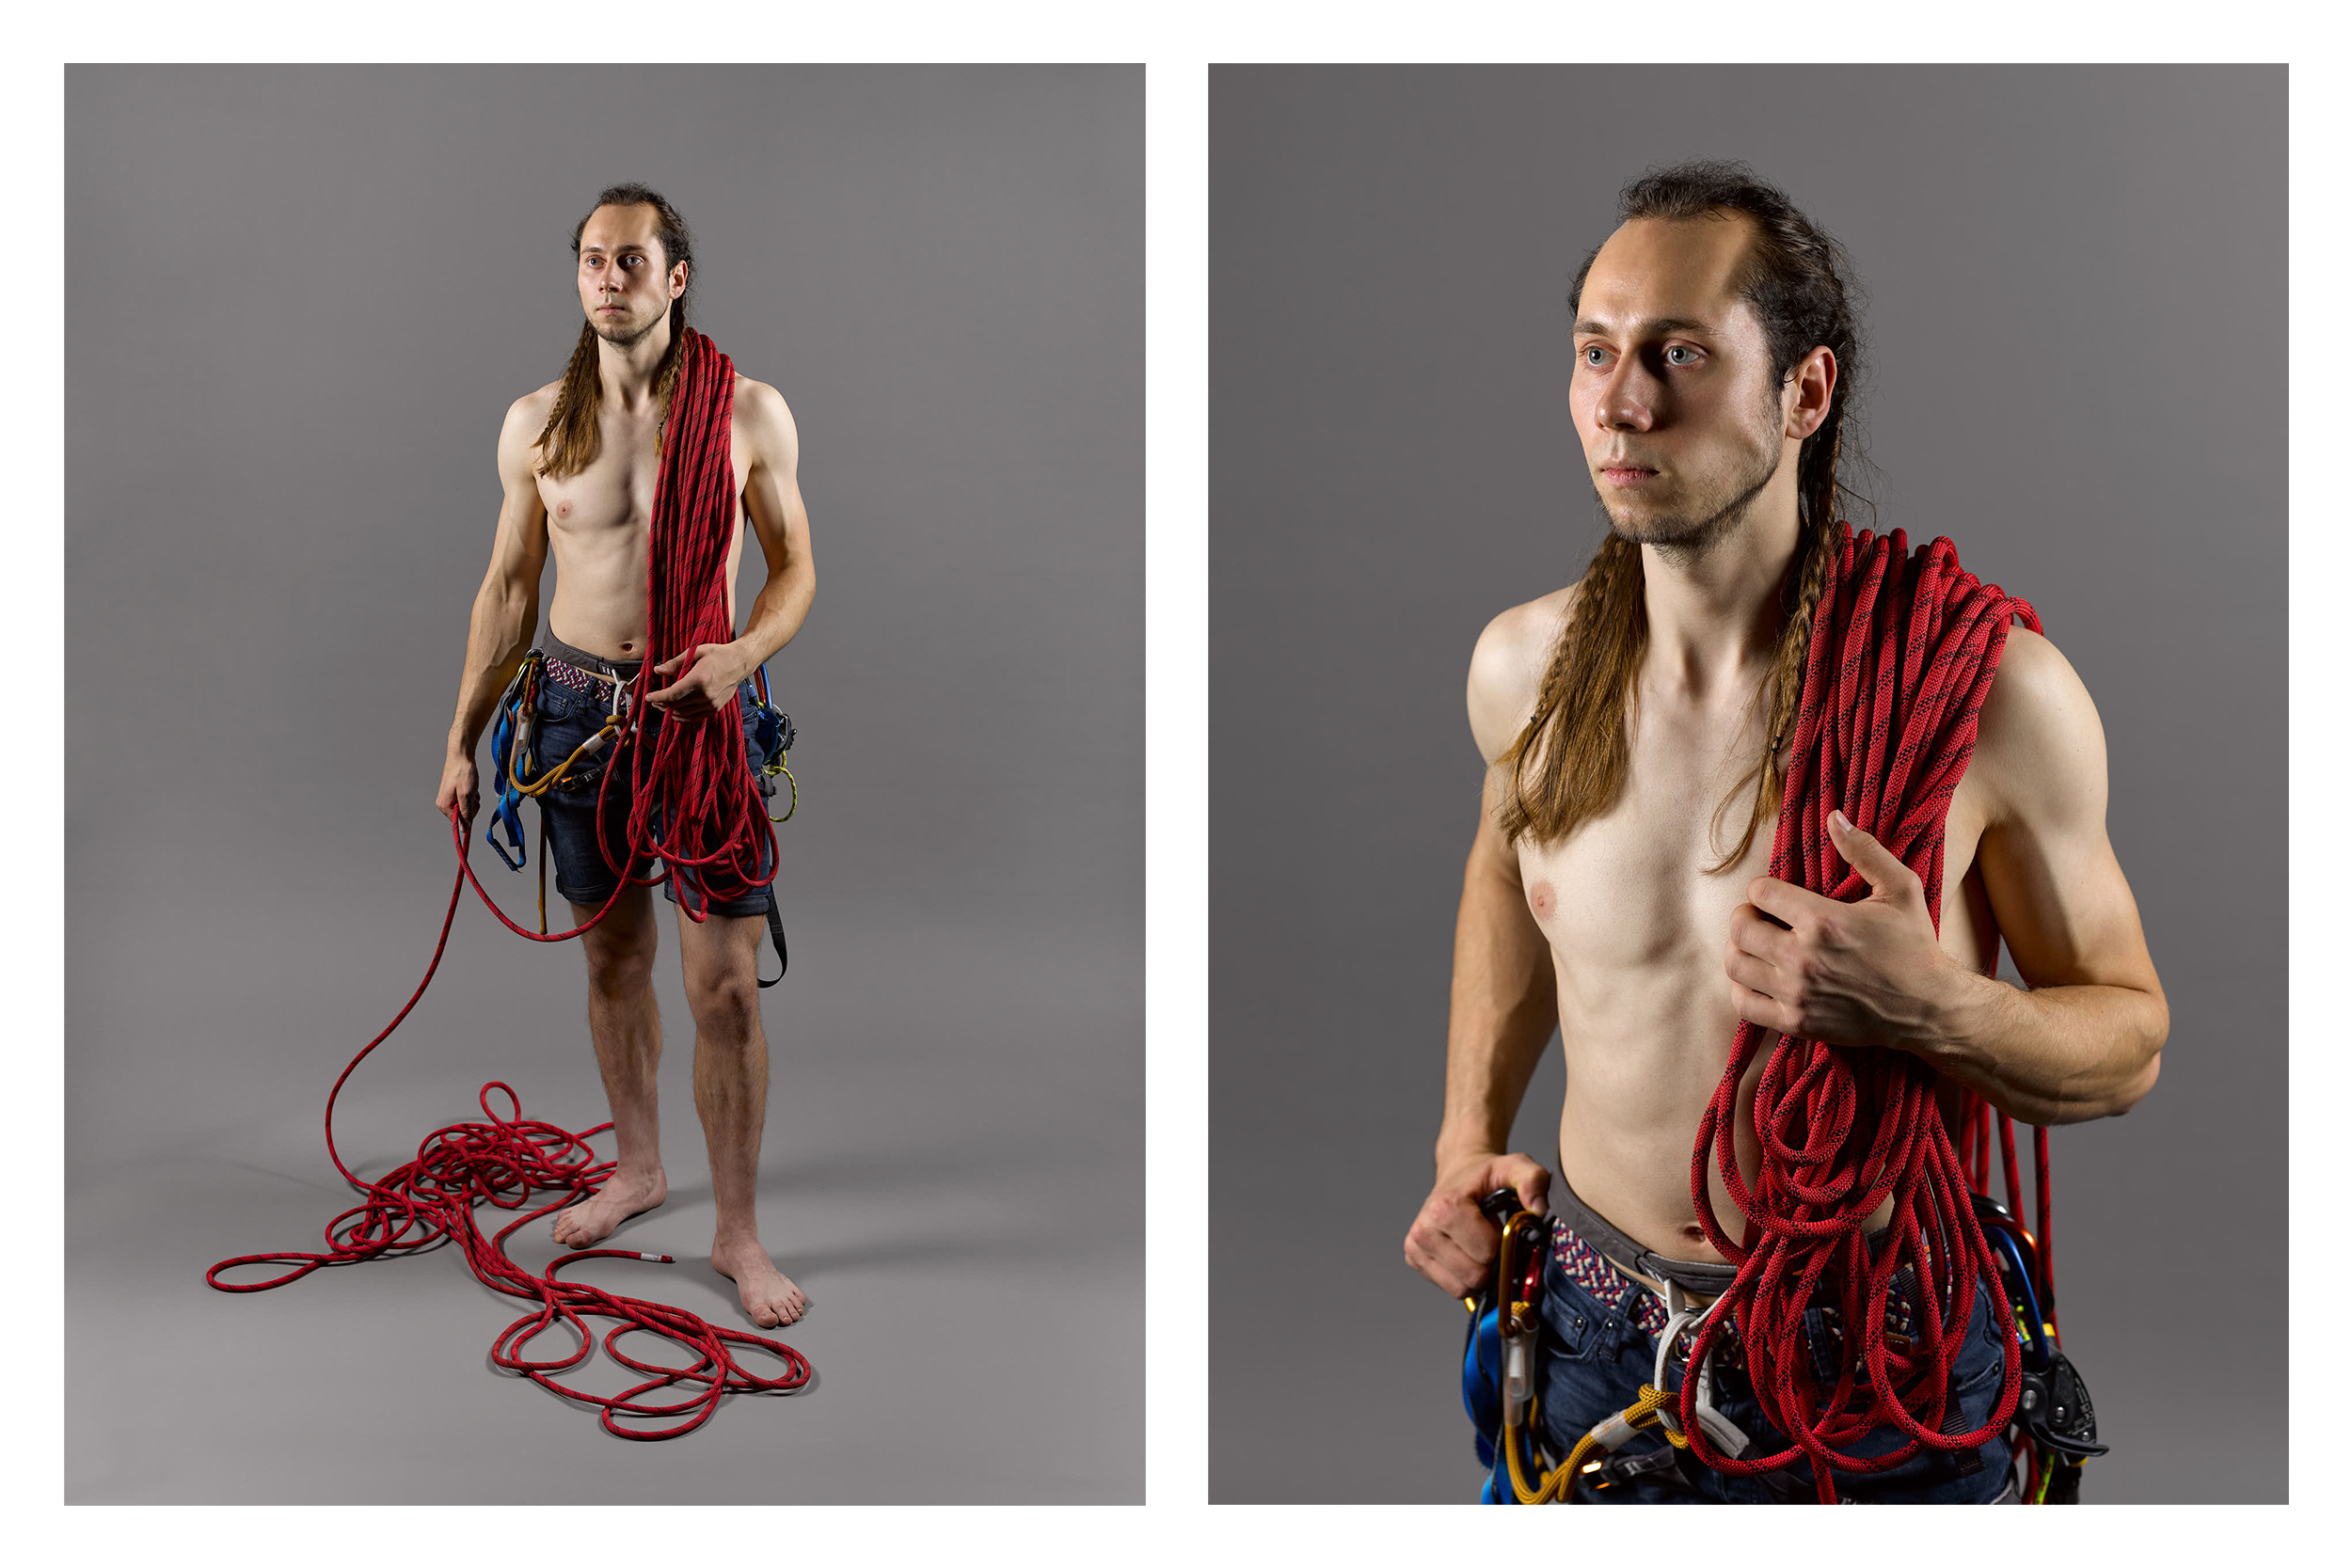 BA Photography work by Tadas Kirtiklis showing a two studio portrait images of a rock-climber with ropes and harnesses